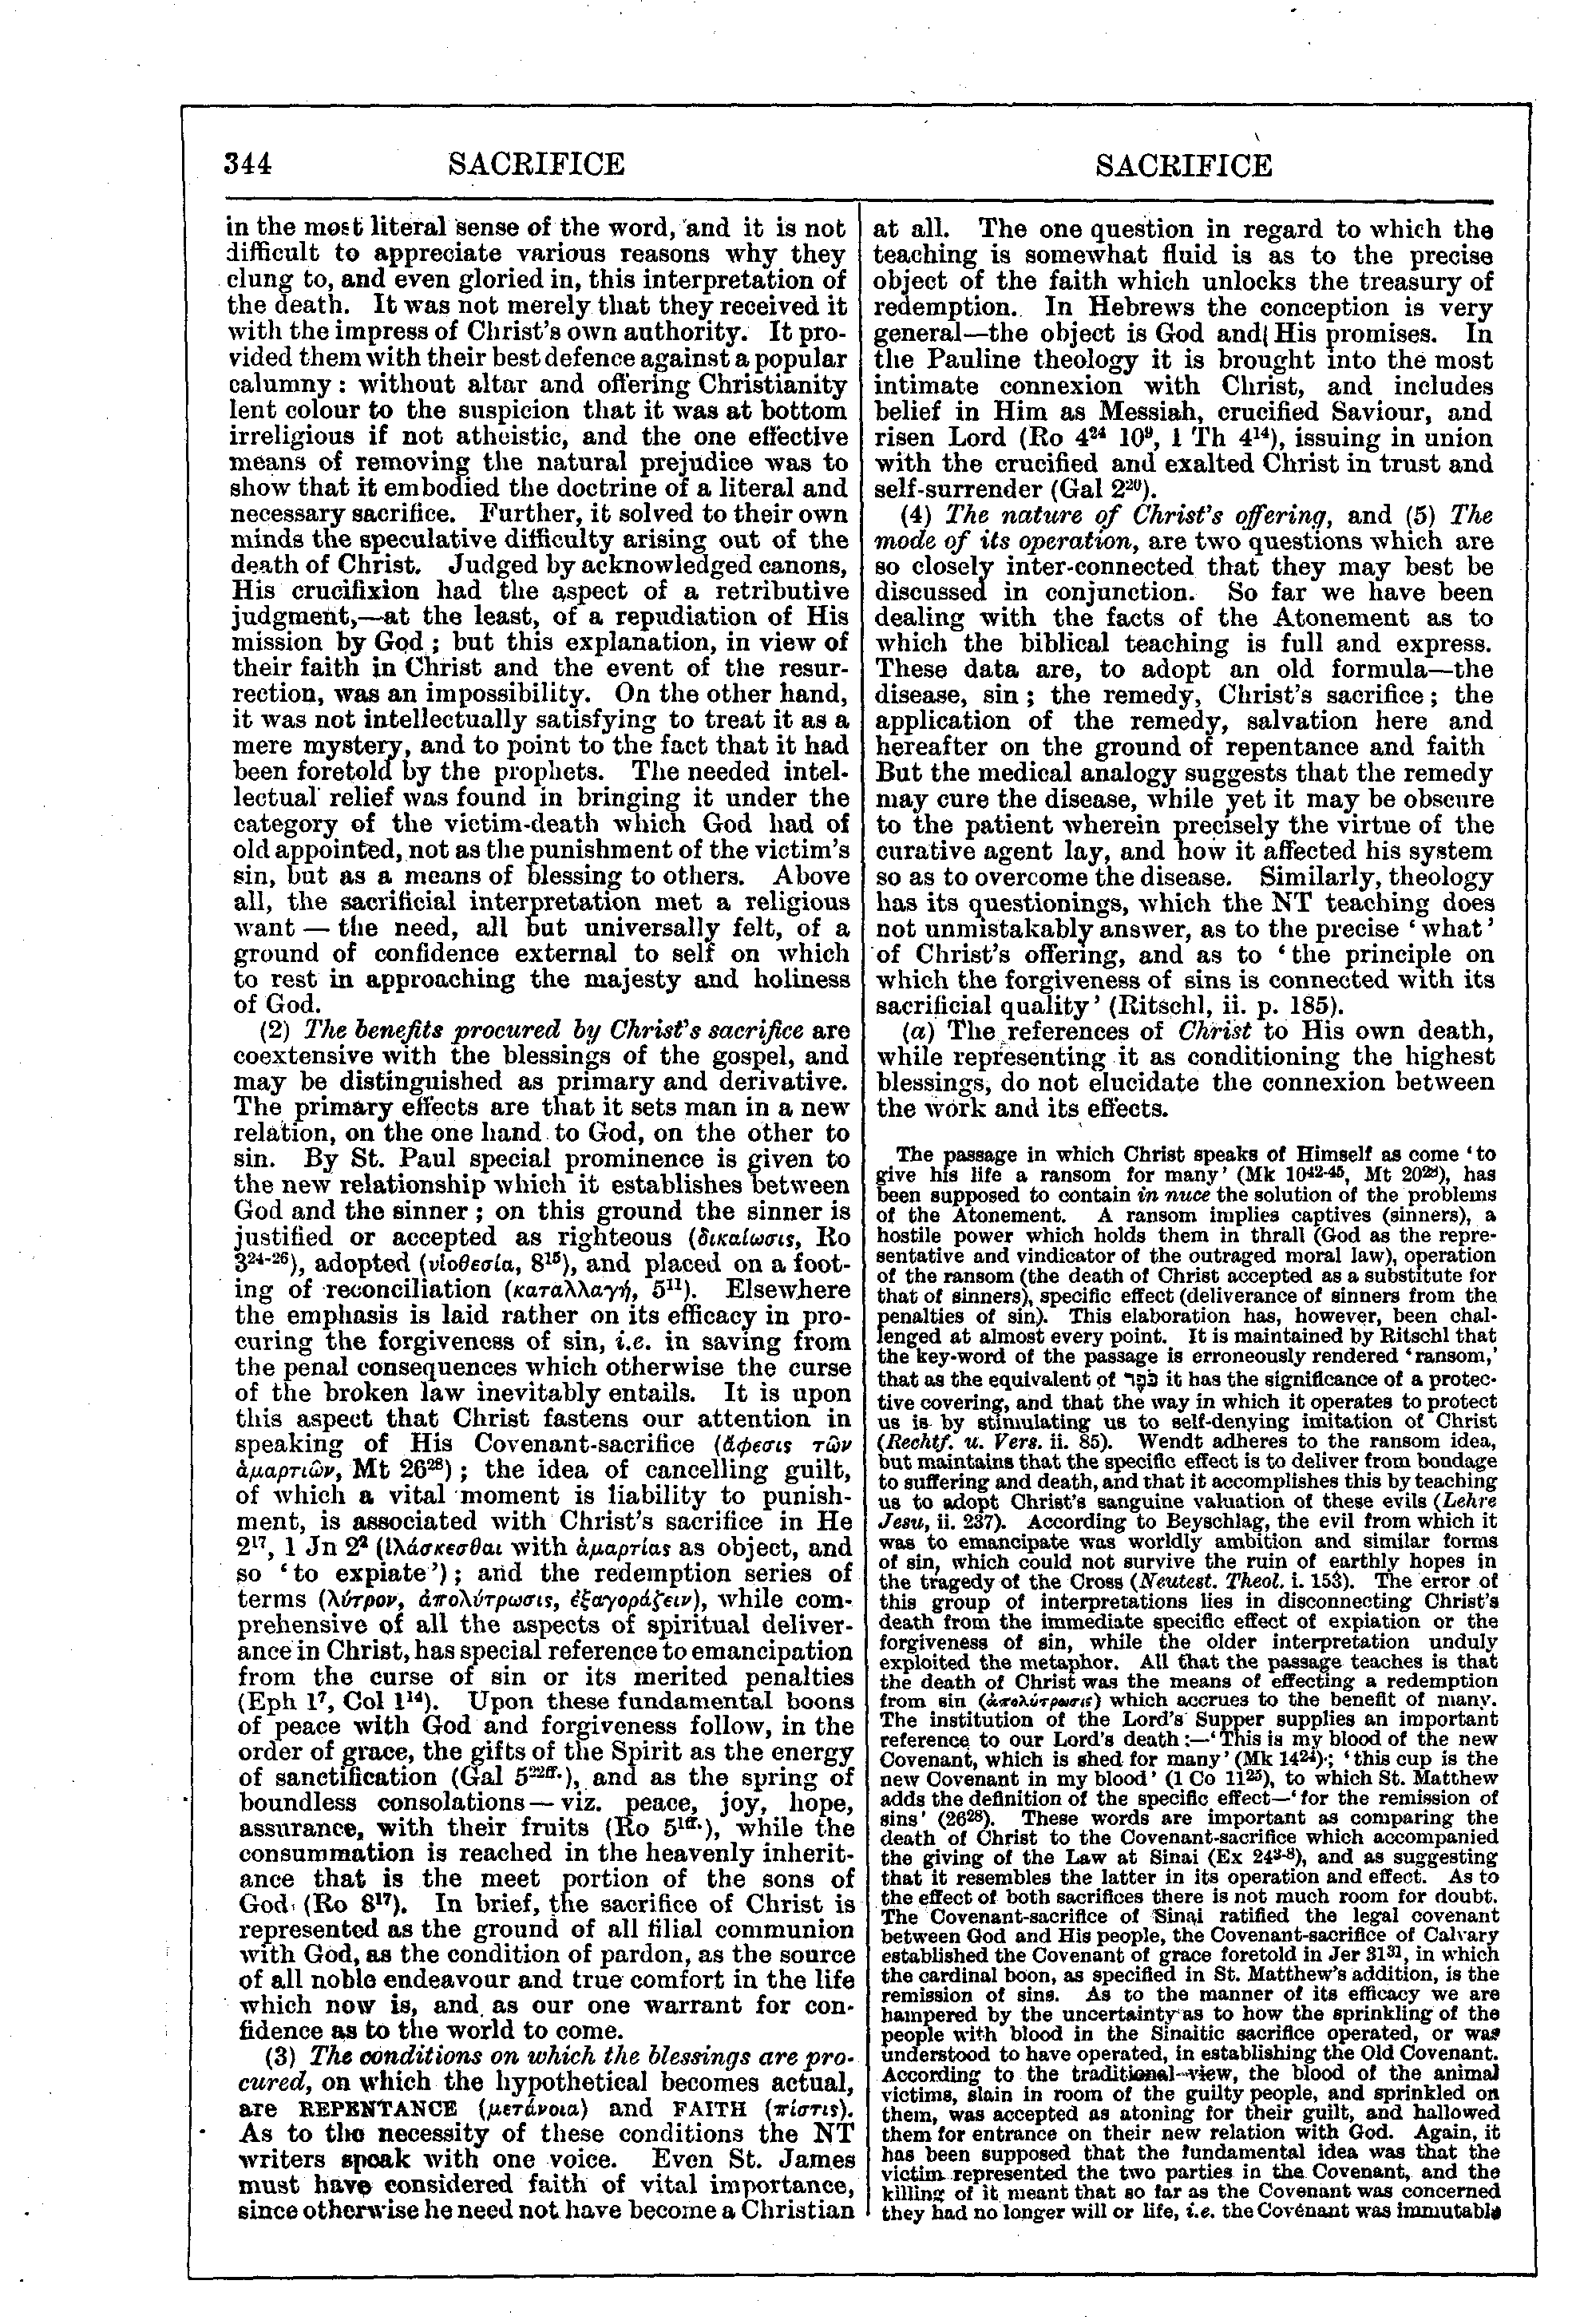 Image of page 344